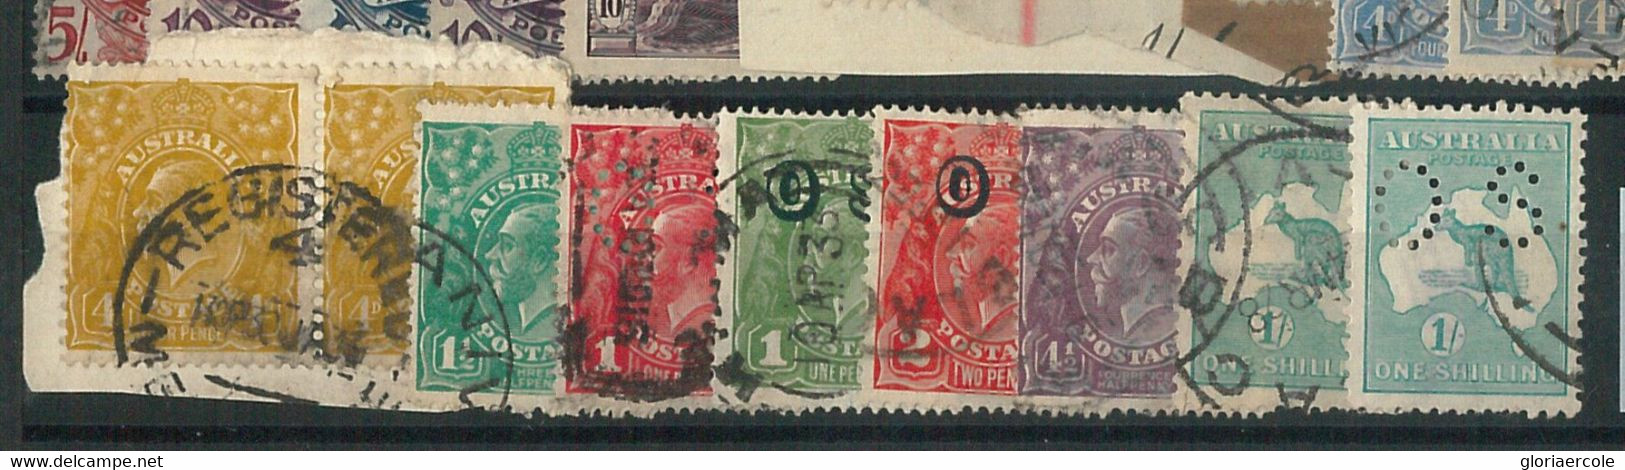 70267 -  AUSTRALIA - STAMP:  Small Lot Of USED Stamps Including REVENUES , O.S. - Impuestos